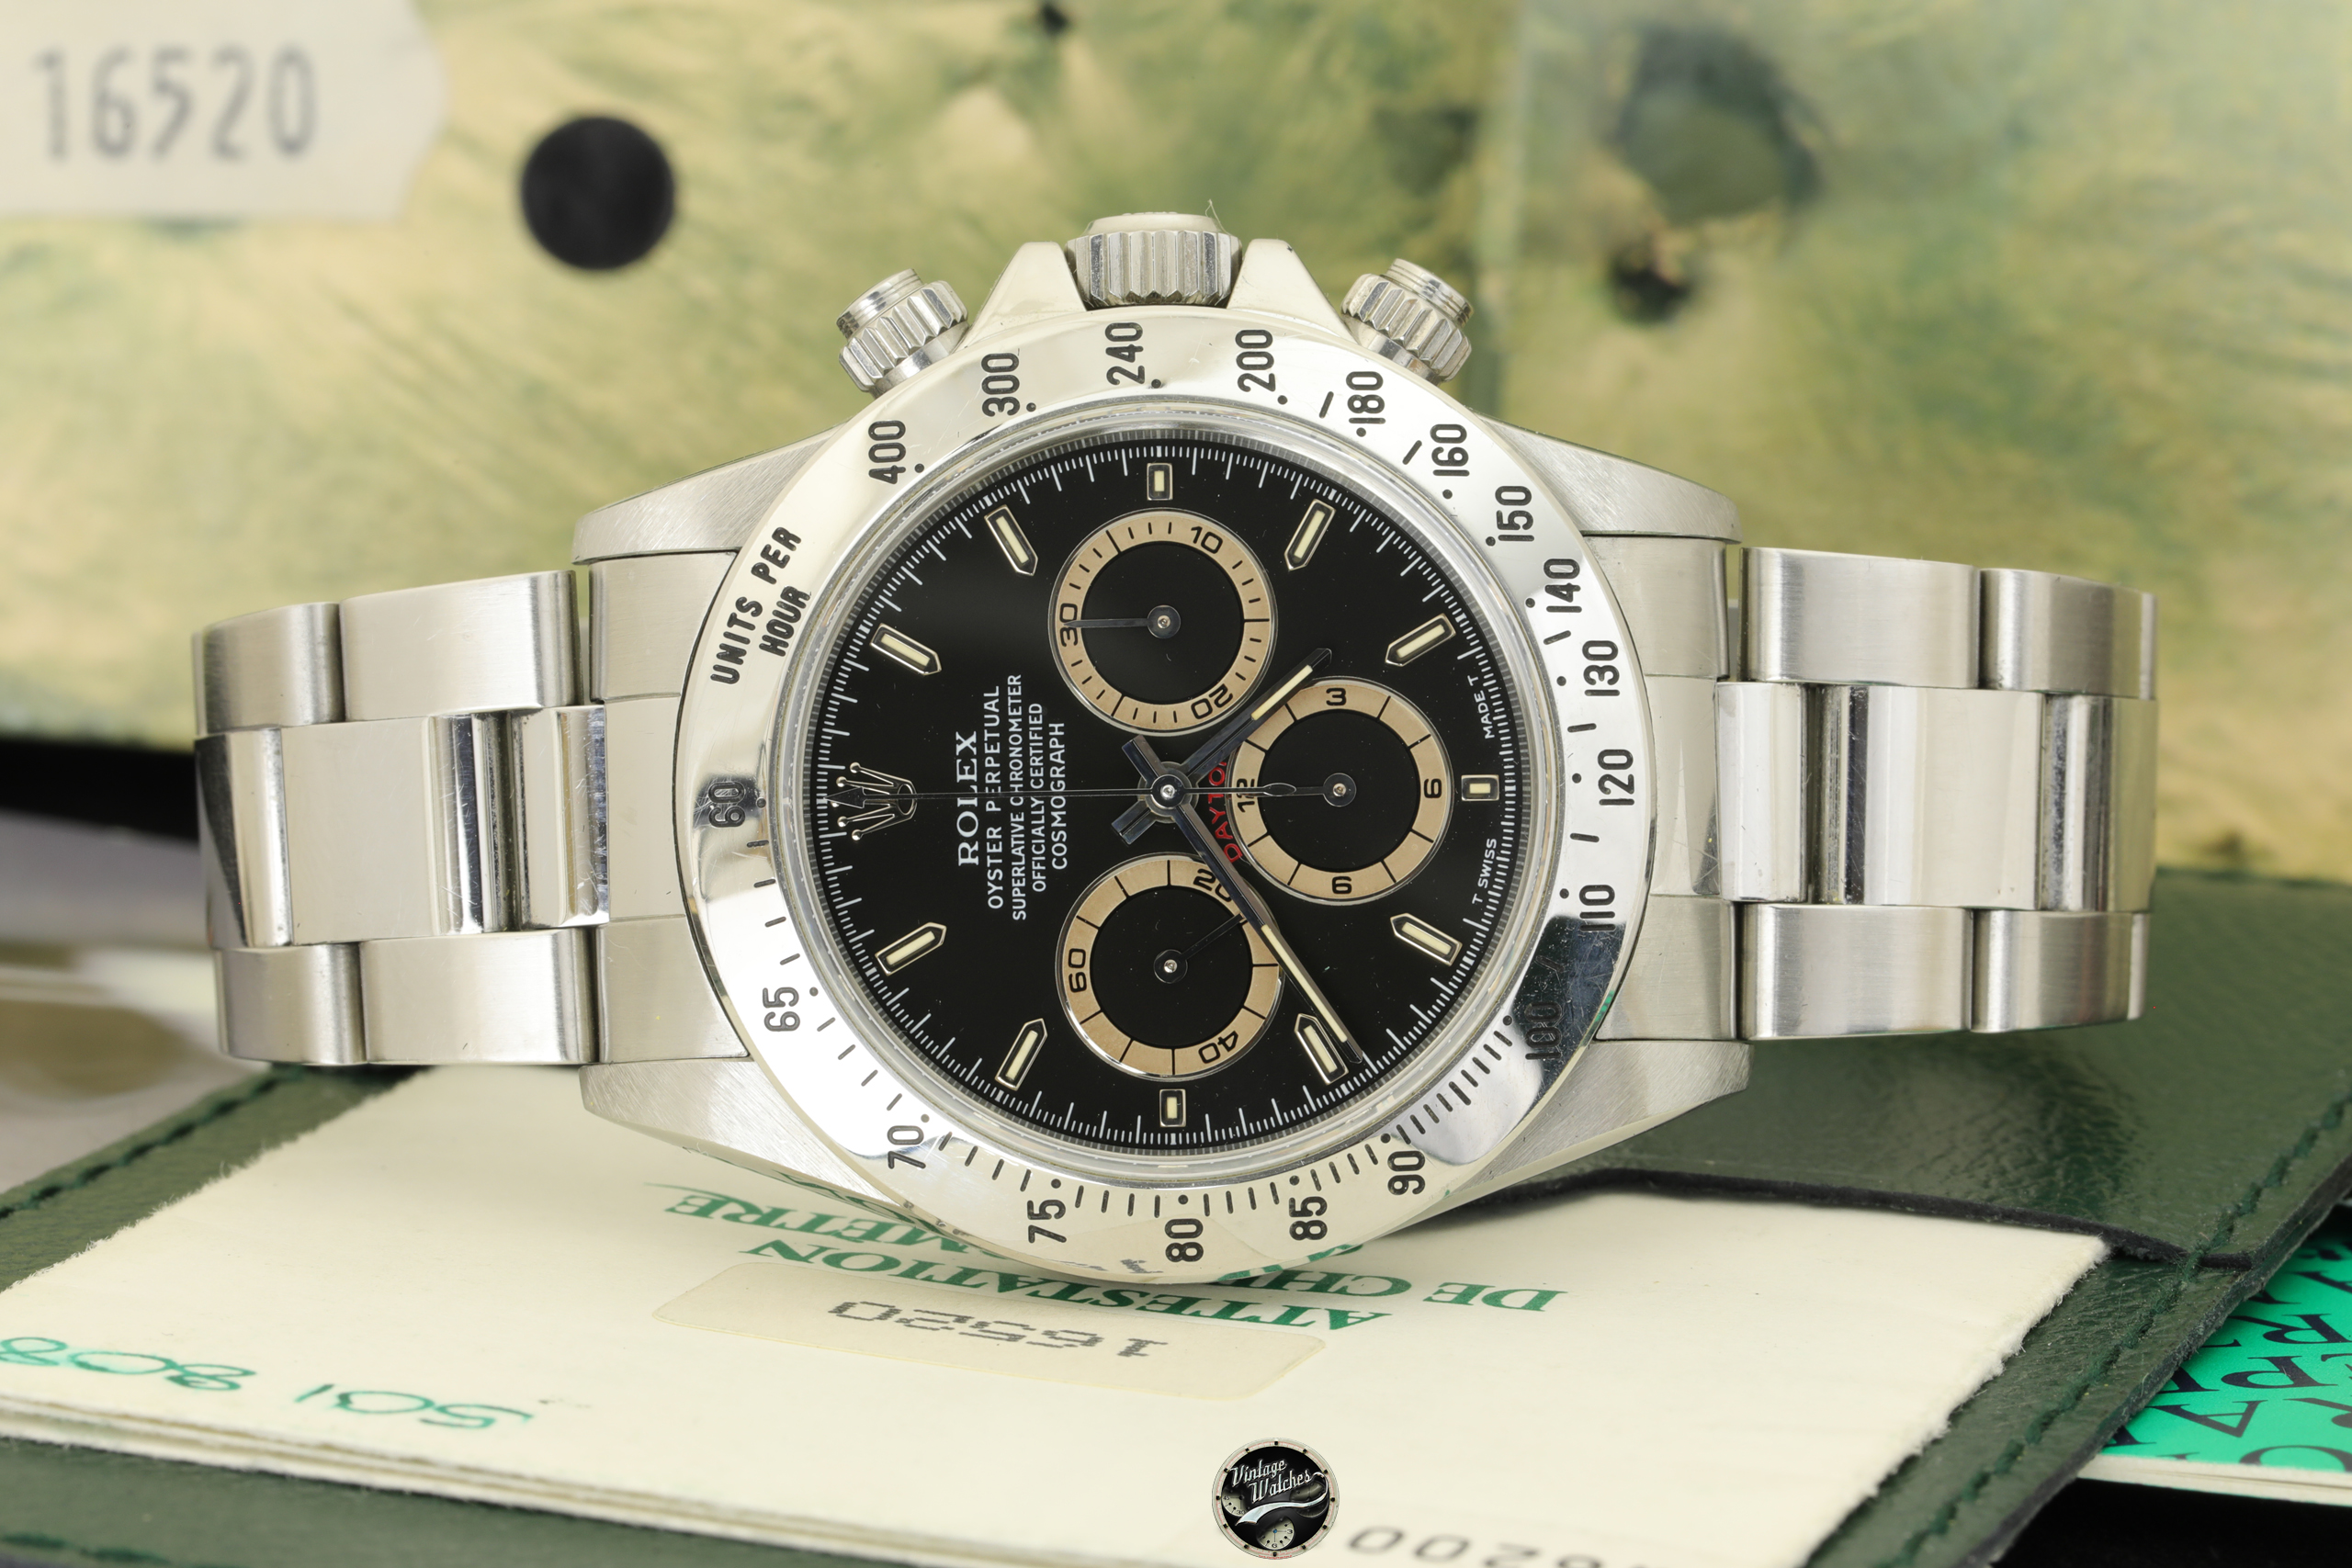 Rolex Submariner ref. 16610 LV ser. Z Mint NOS Full Stickers and Full Set -  Vintage Watches - Stefano Mazzariol